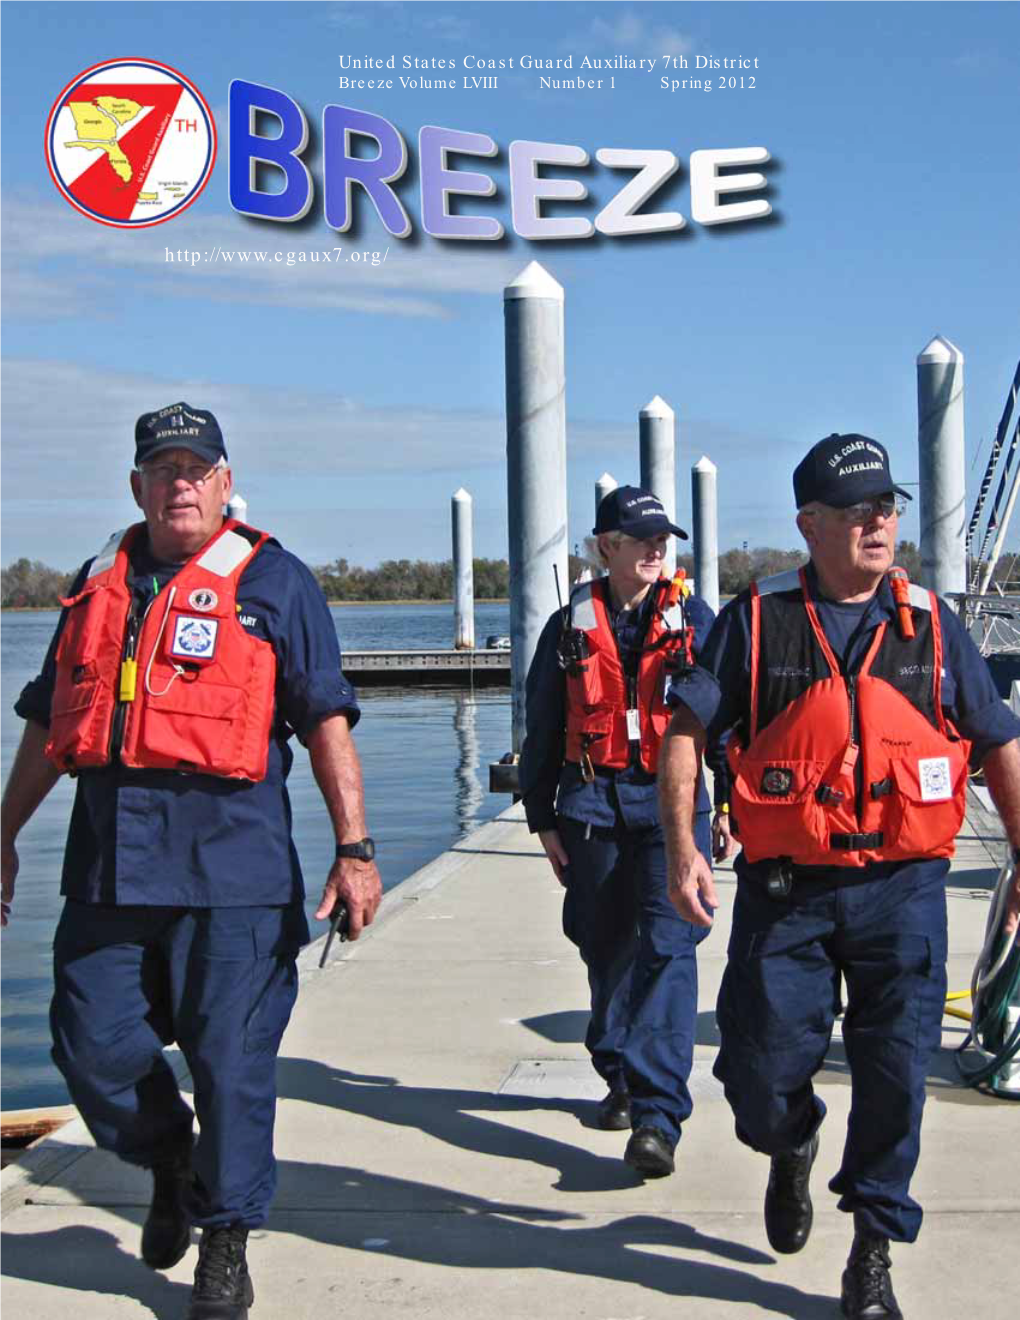 United States Coast Guard Auxiliary 7Th District Breeze Volume LVIII Number 1 Spring 2012